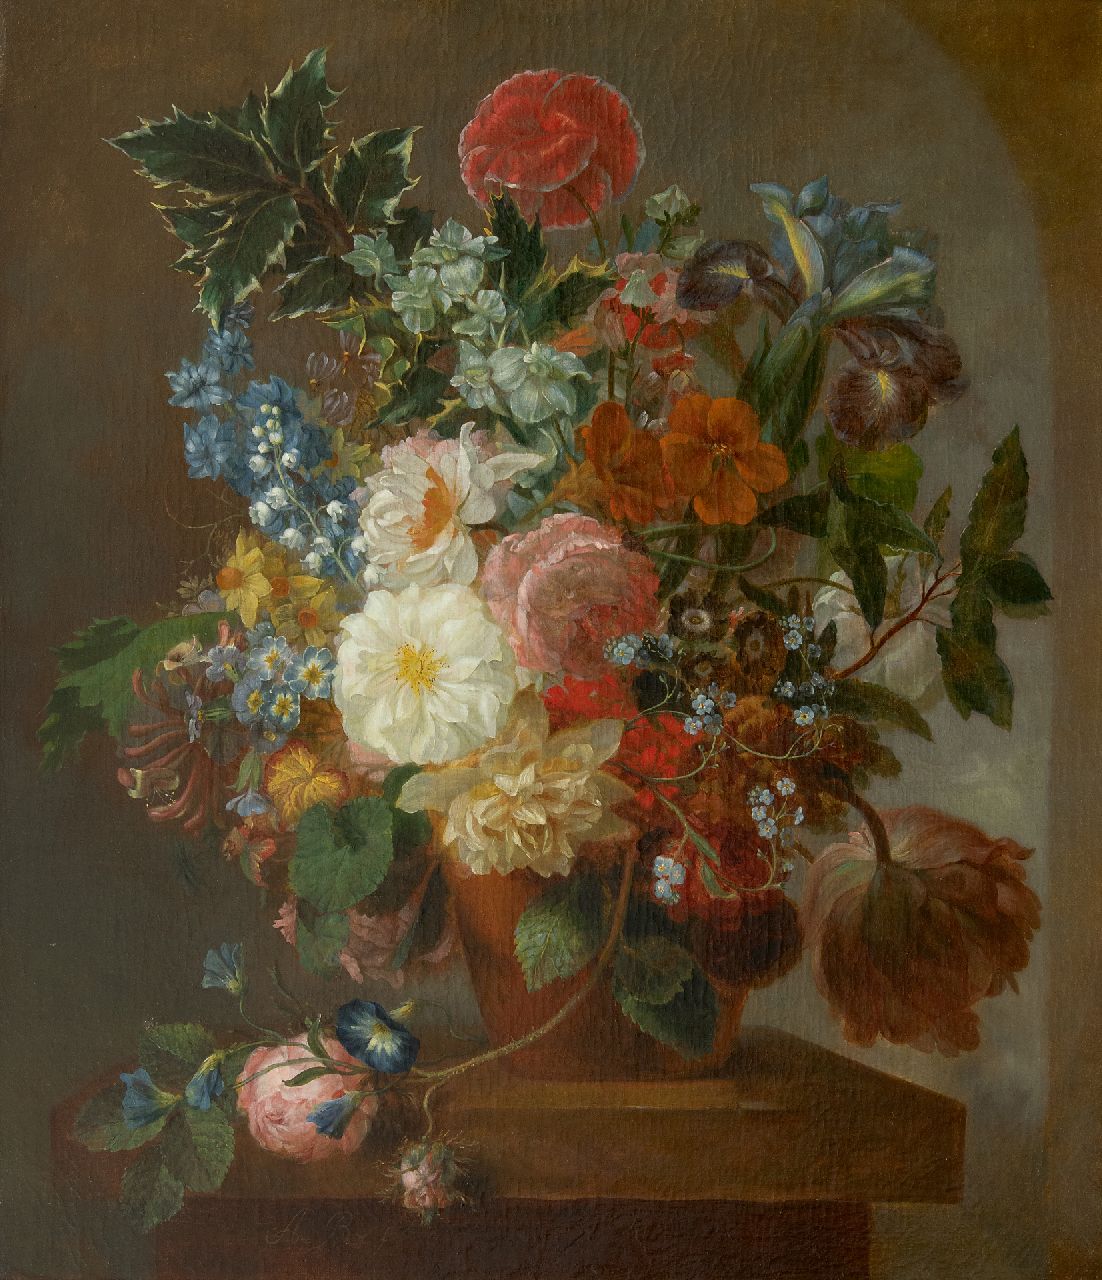 Reijerman A.  | Annette 'Anna' Reijerman, A flower still life on a marble ledge, oil on canvas 59.7 x 51.6 cm, signed l.l. with initials